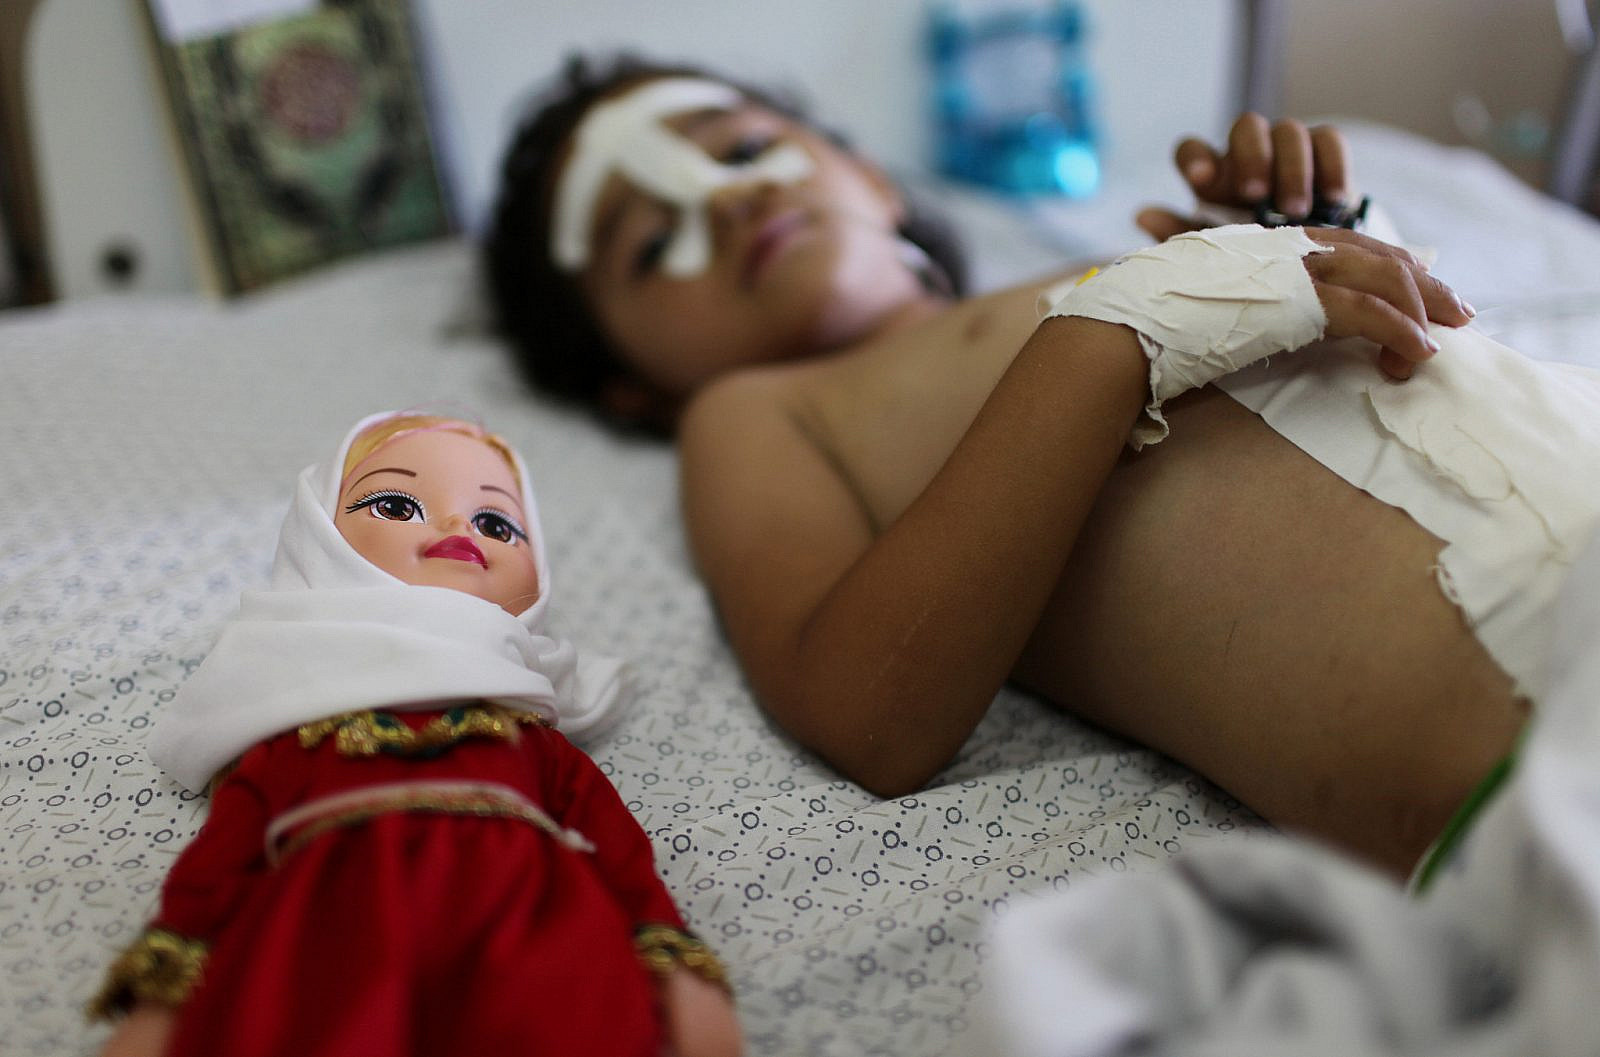 Four-year-old Palestinian girl Shayma Al-Masri, who was wounded in an Israeli air strike that killed her mother and two of her siblings, lies next to her doll as she receives hospital treatment in Gaza City, July 14, 2014. (Emad Nassar/Flash90)